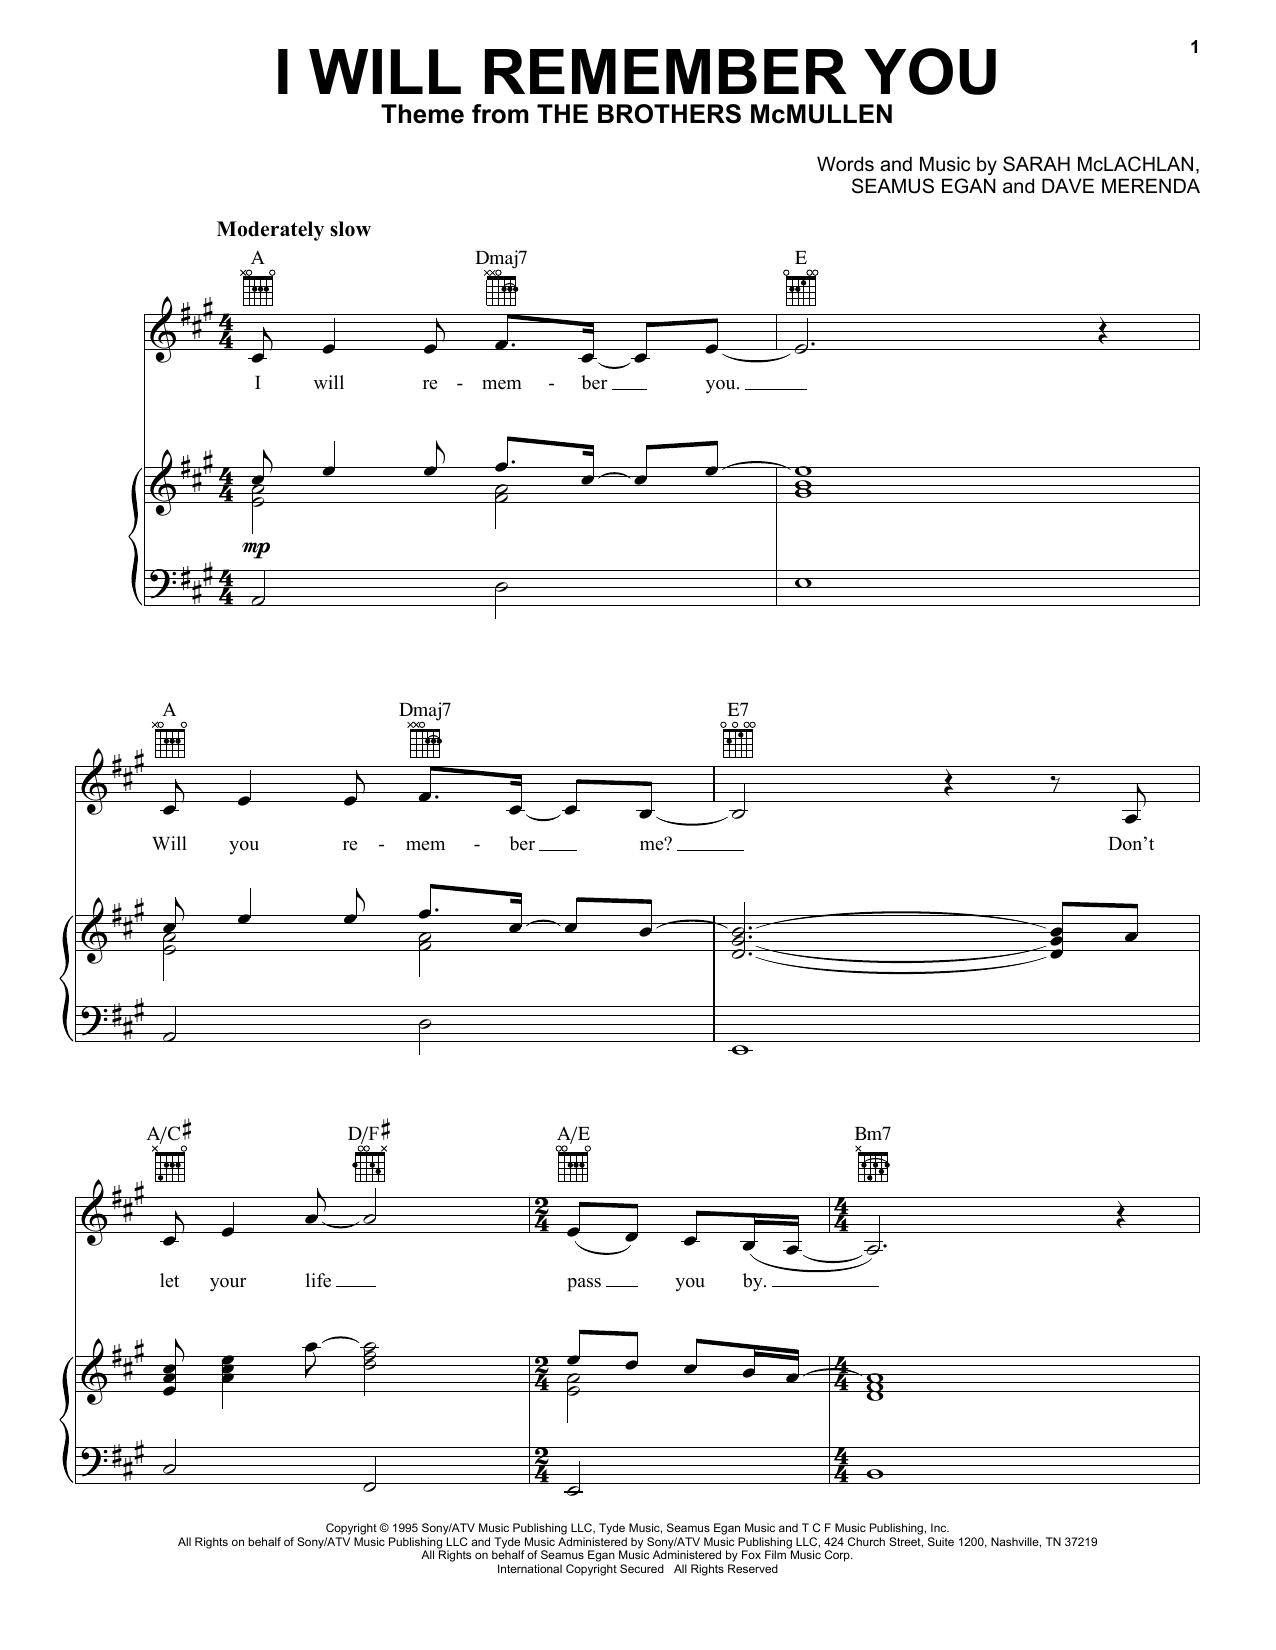 Download Sarah McLachlan I Will Remember You sheet music notes and chords for Piano, Vocal & Guitar (Right-Hand Melody) - Download Printable PDF and start playing in minutes.